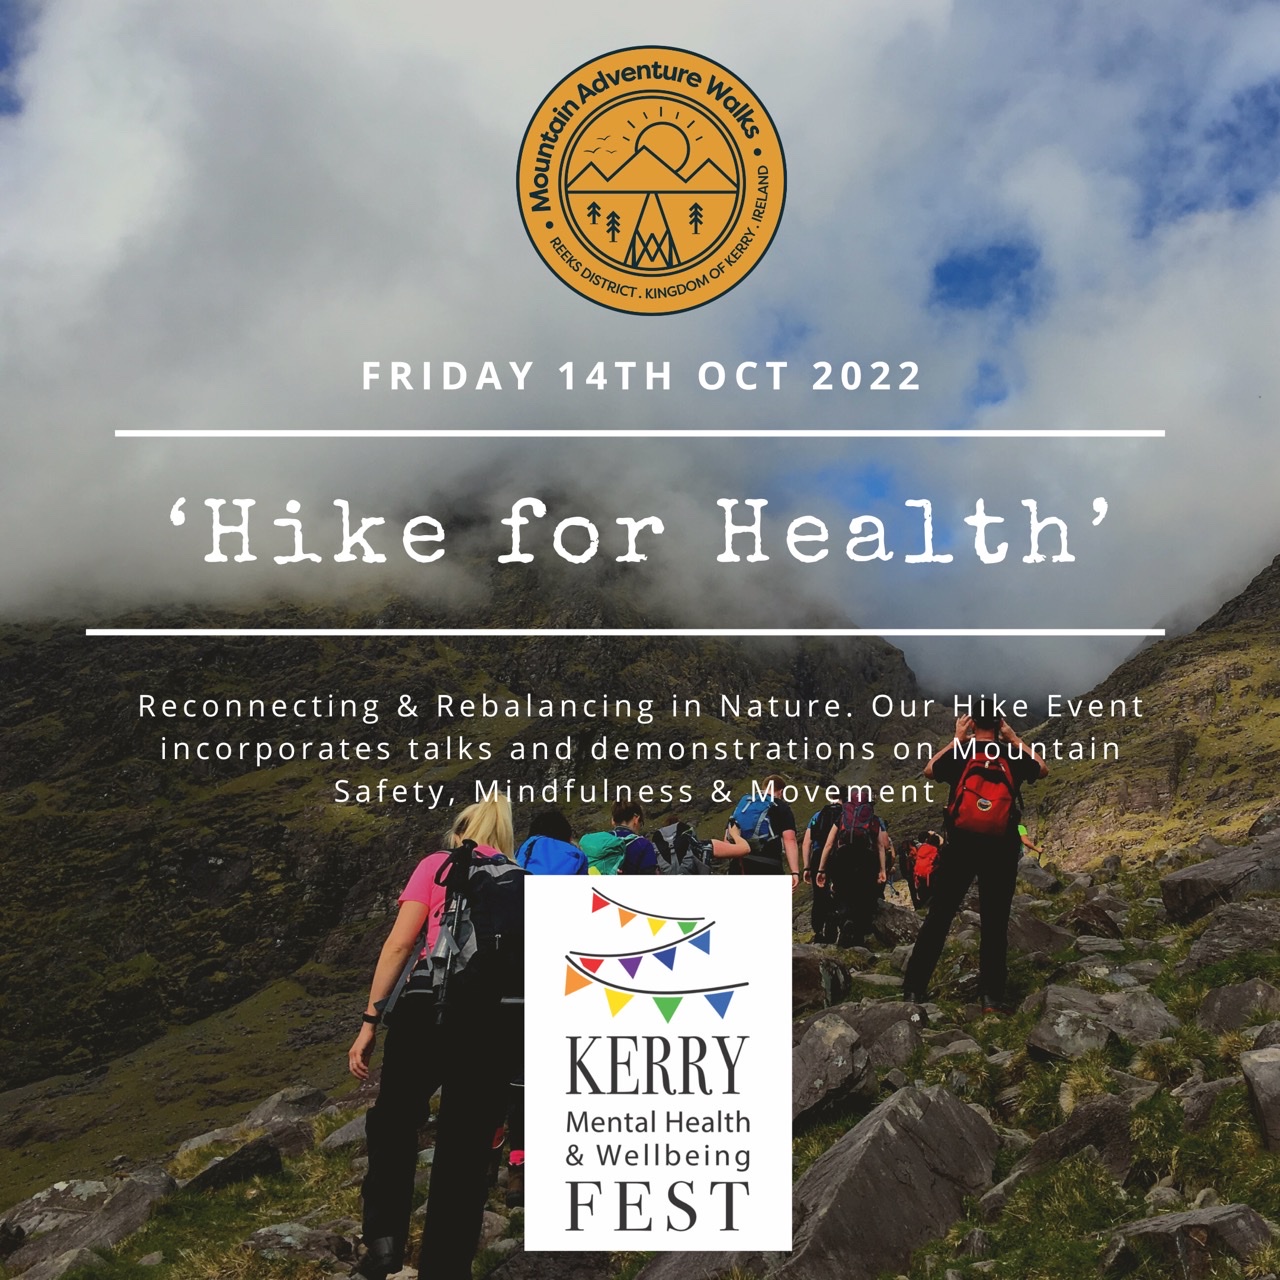 Hike for Health event at Kerry Mental Health & Wellbeing Fest 2023